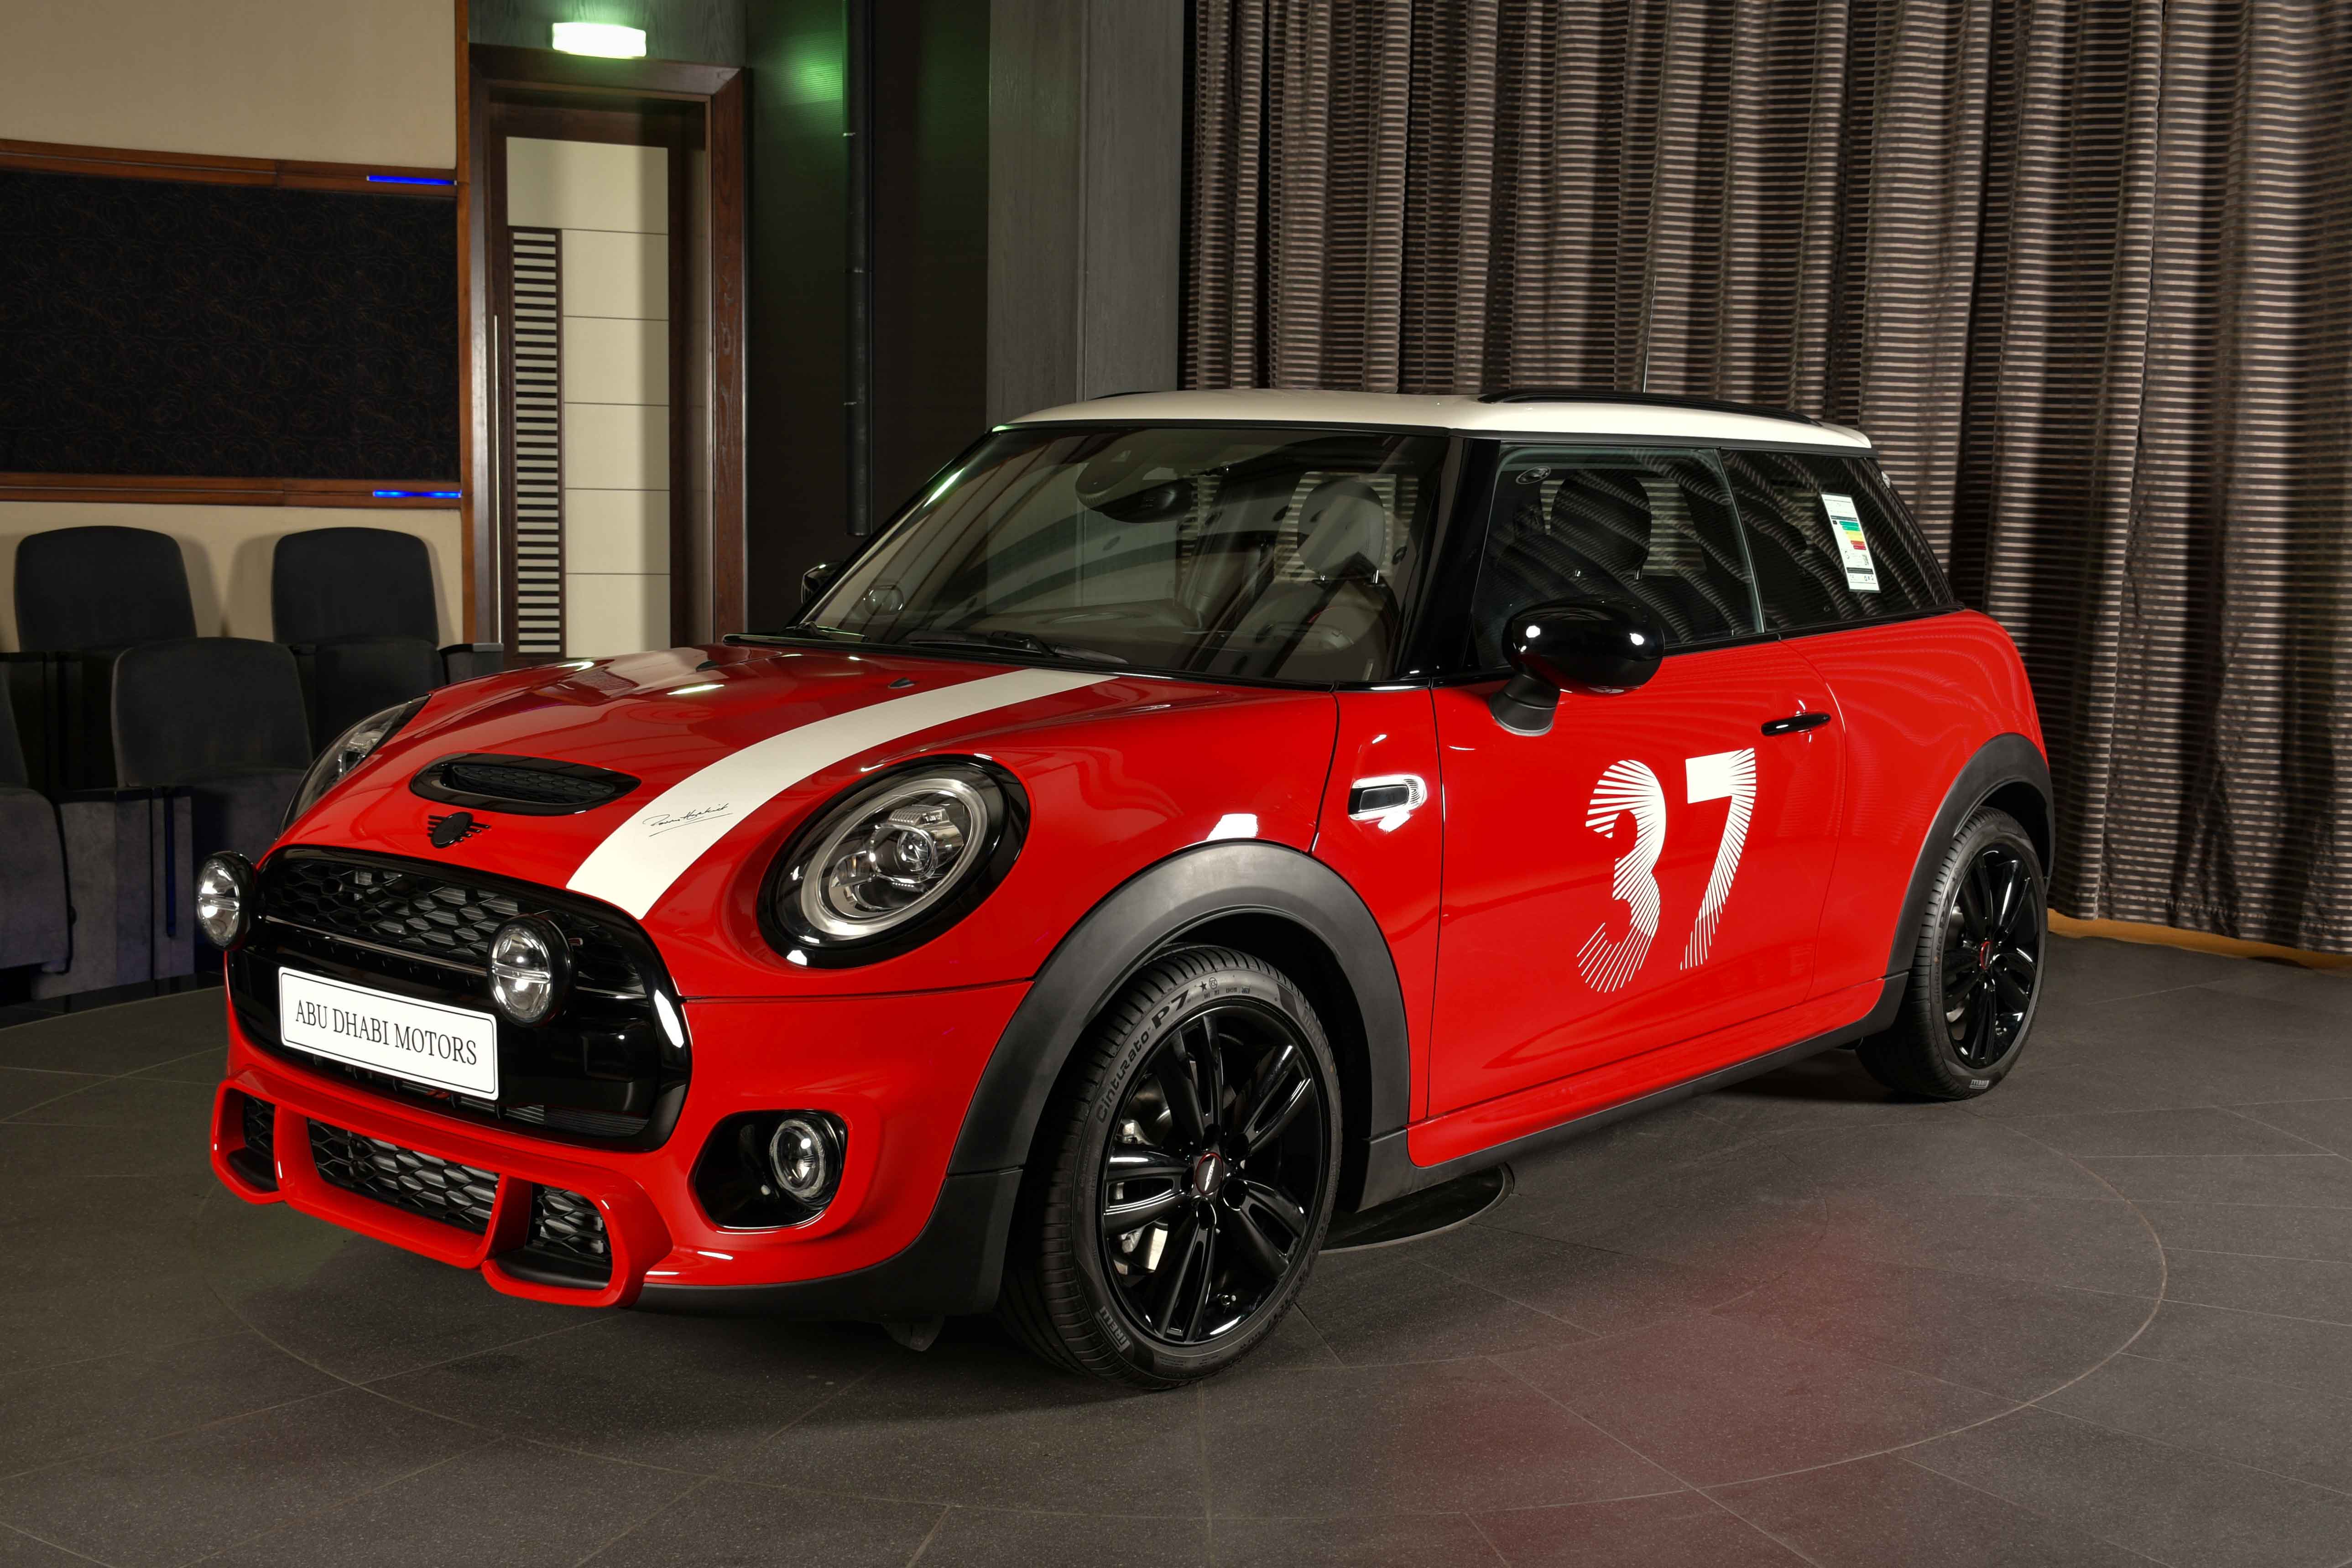 The much-anticipated MINI Paddy Hopkirk Edition is now available at Abu Dhabi Motors